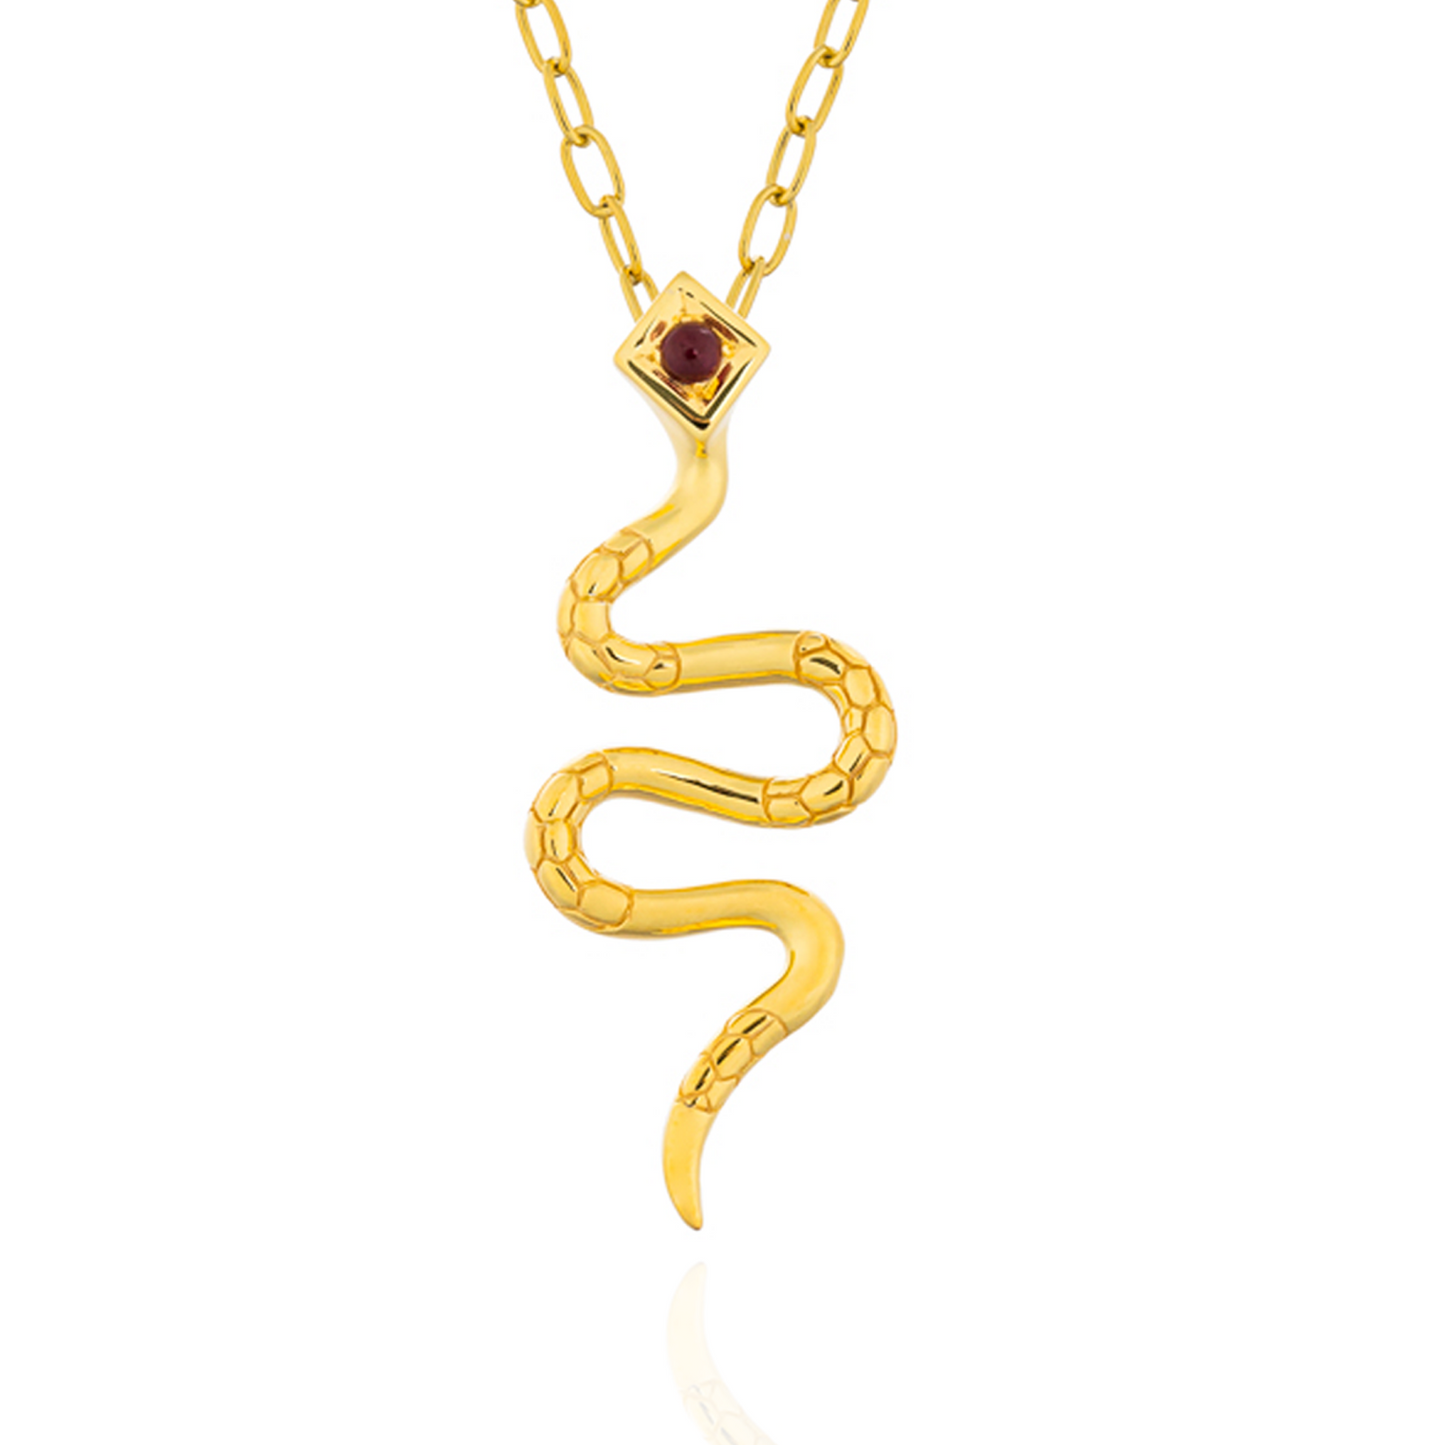 Serpentine 925 Silver Snake Necklace with Ruby Cabouchon